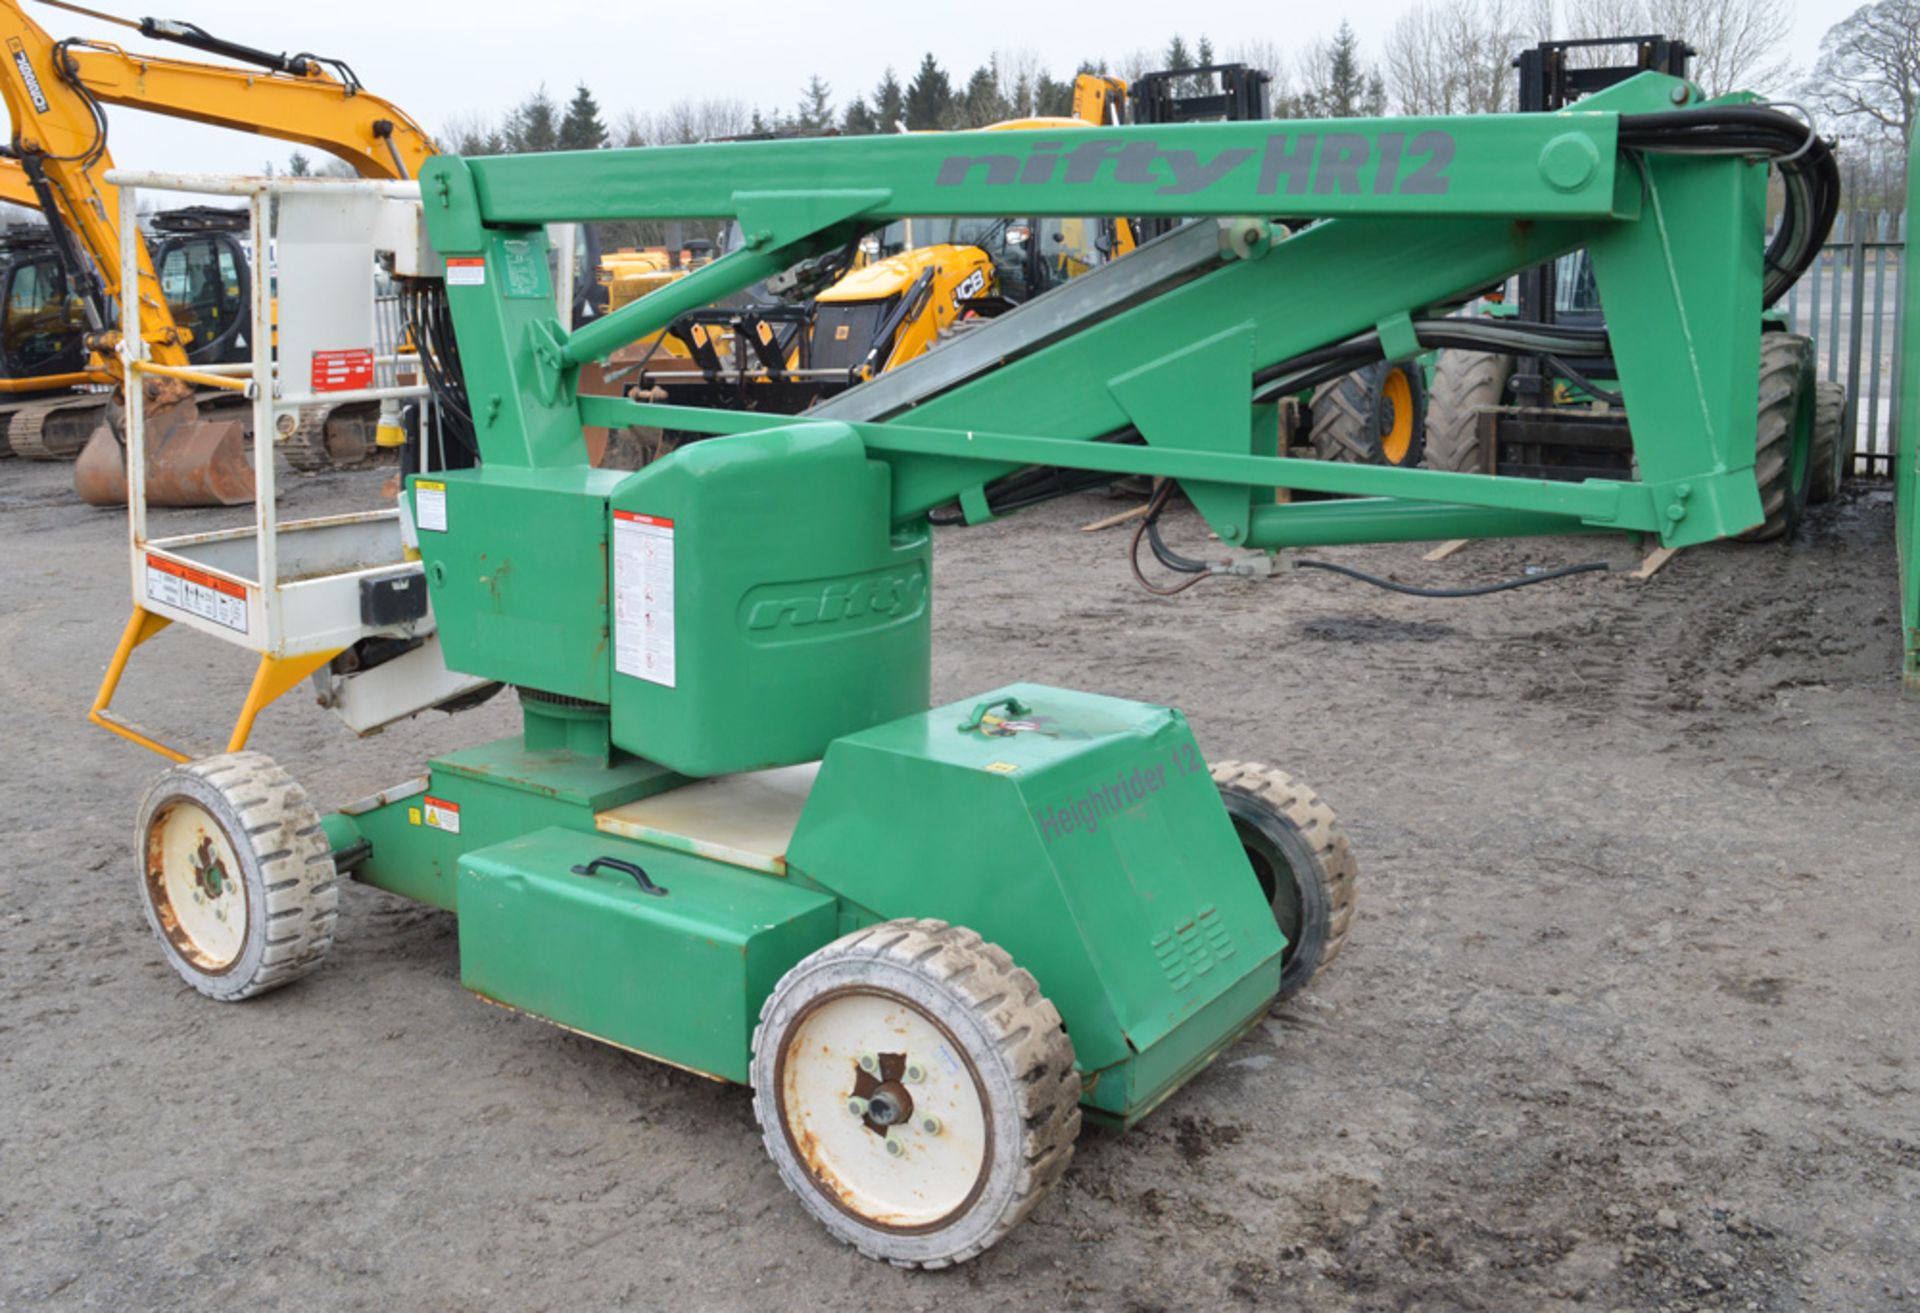 Nifty HR12 height rider 12 metre diesel/battery boom lift Year: 2008 S/N: 17701 A512398 - Image 4 of 5